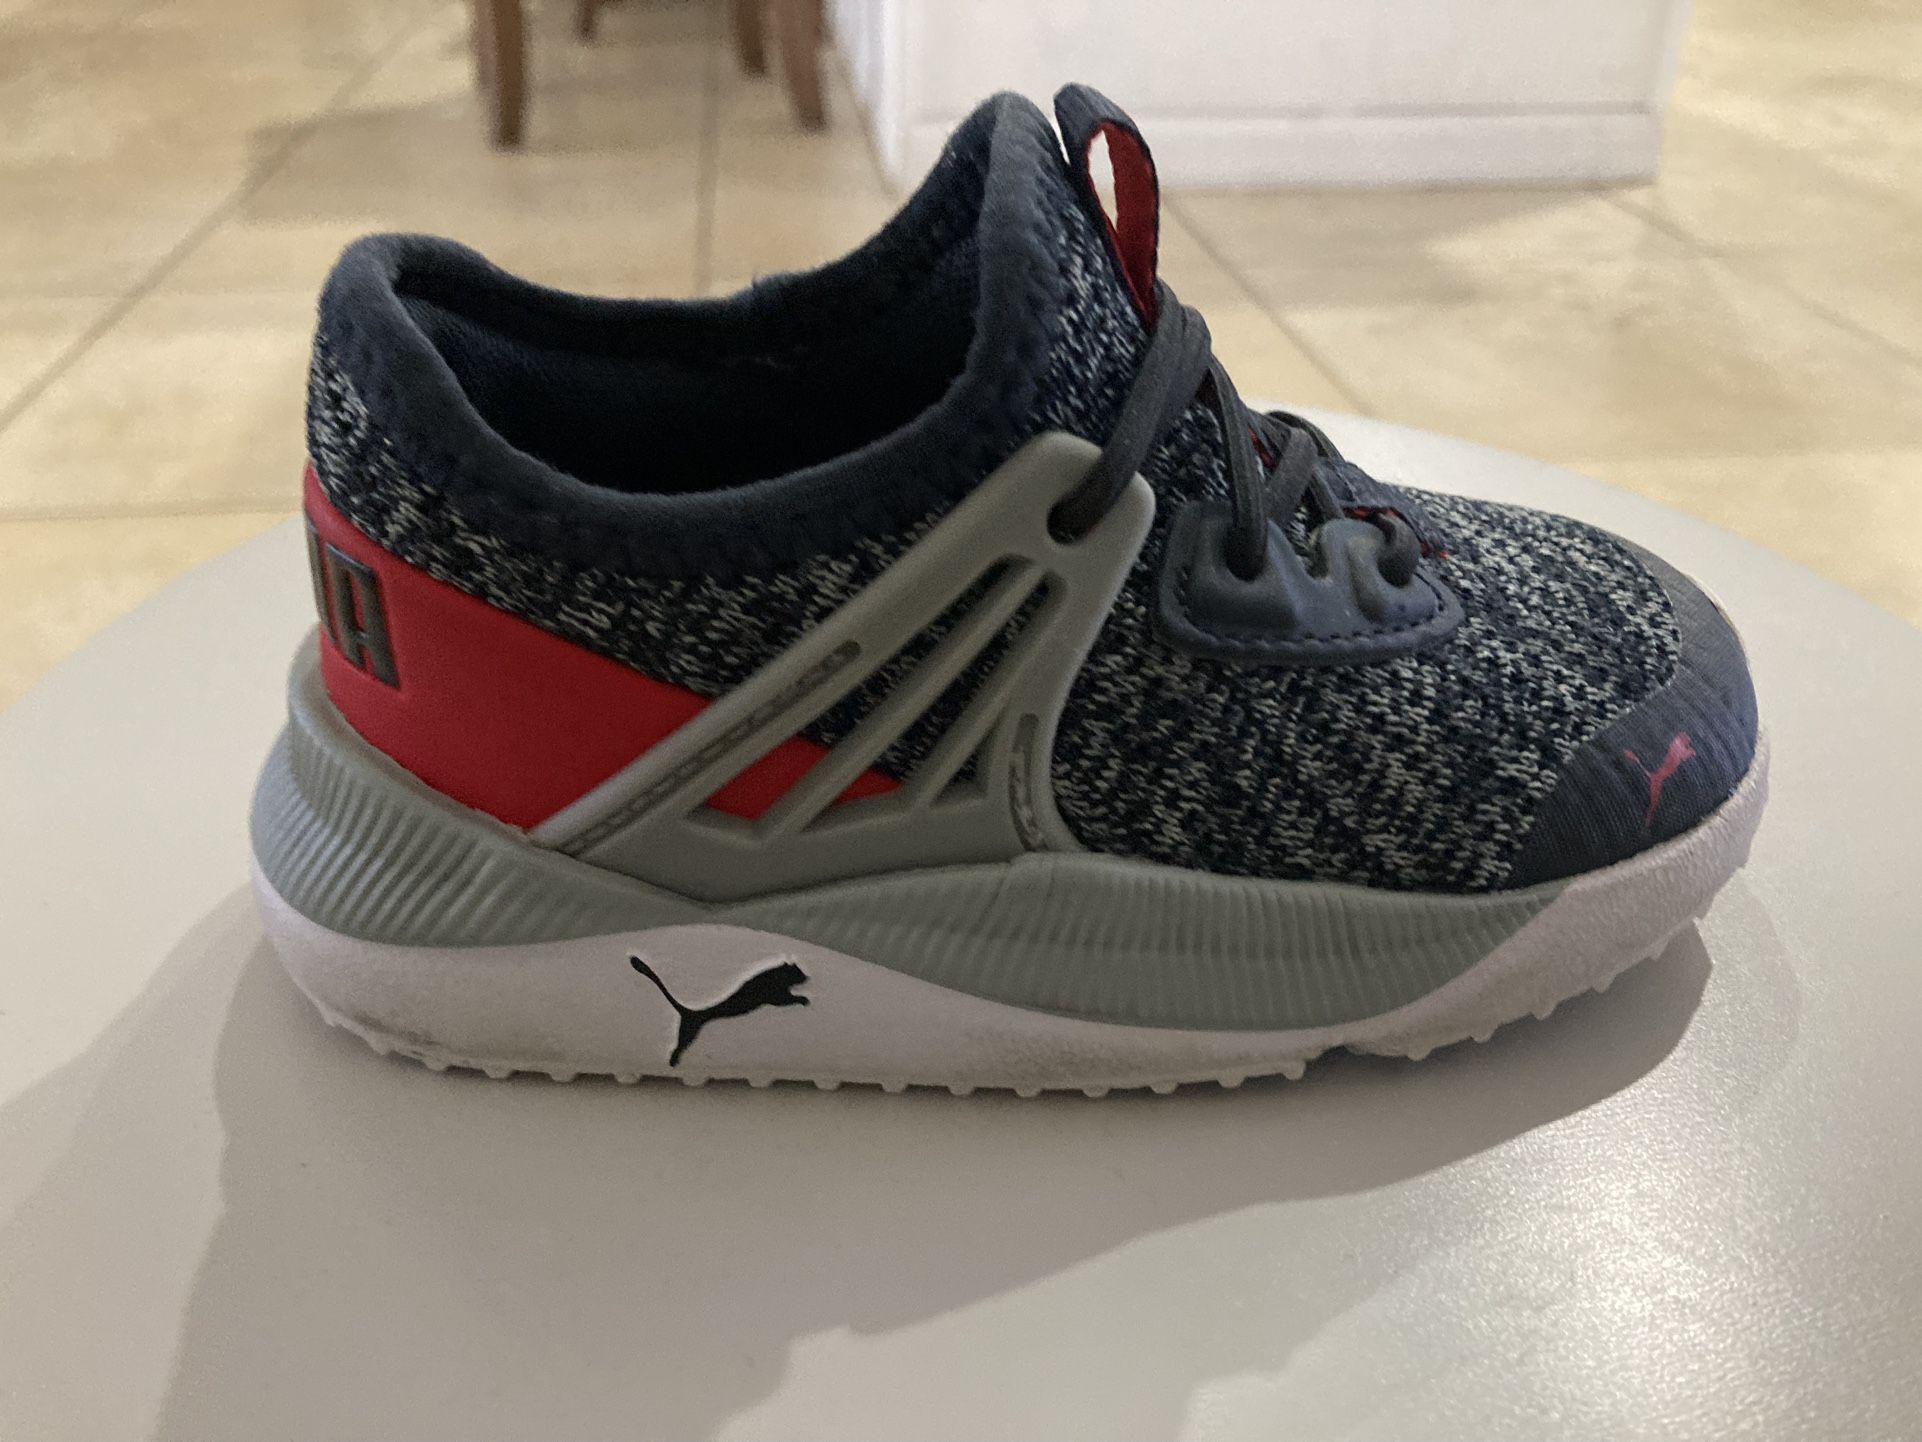 Toddler Size 7 Puma Shoes 